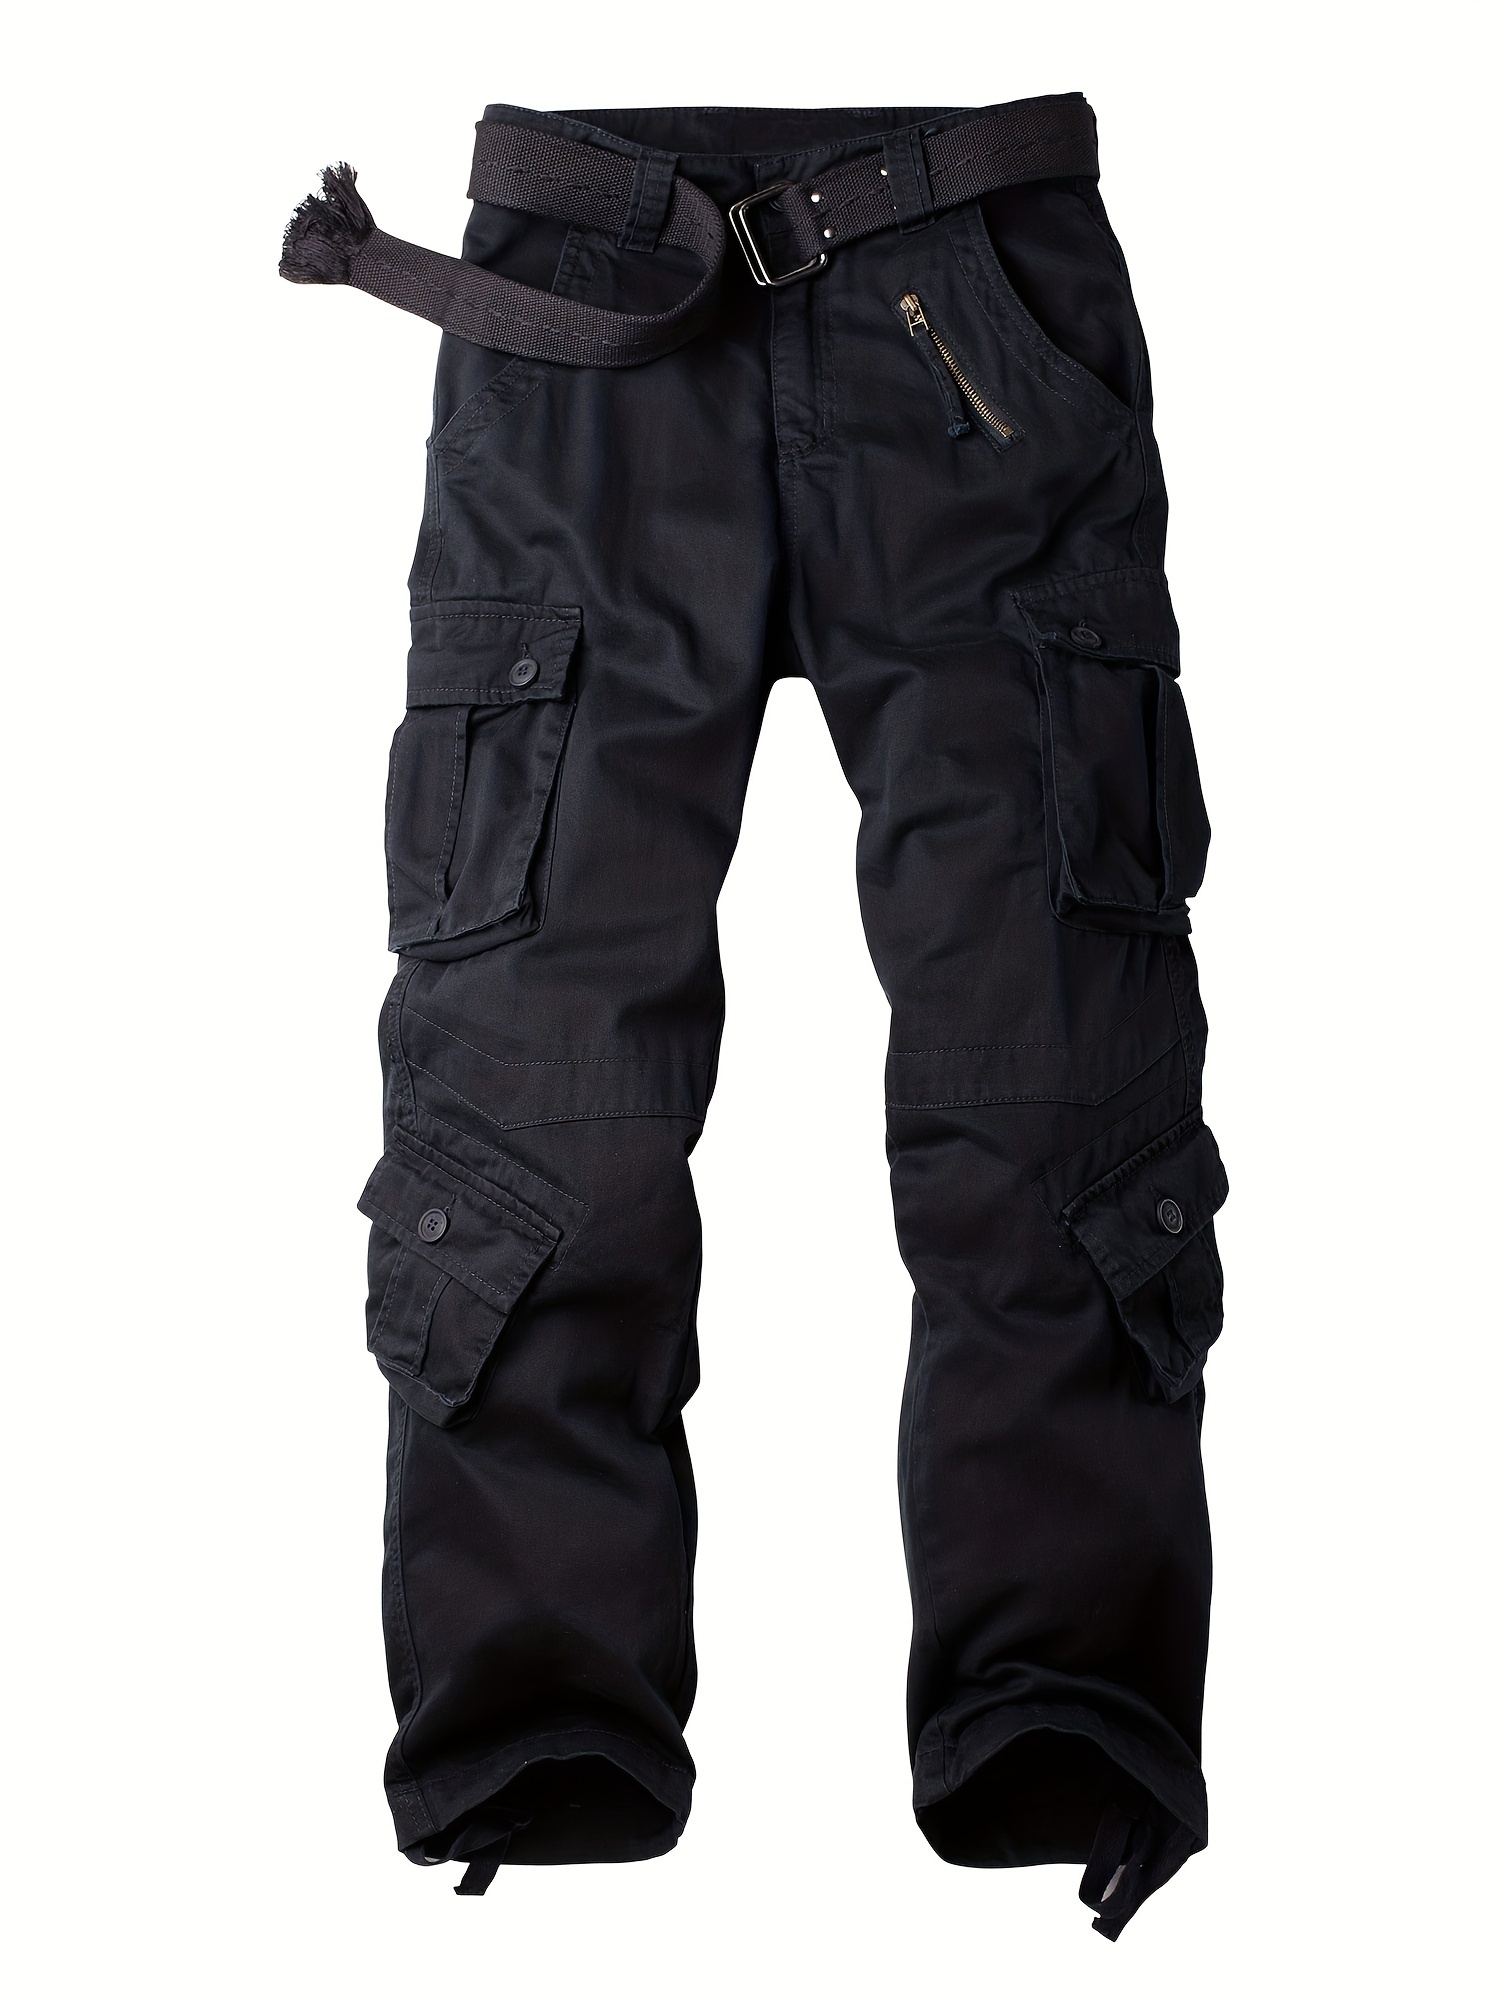 Mens Cargo Combat Work Trousers by RSW Size 30 to 42 - BLACK NAVY CHINO  PANTS